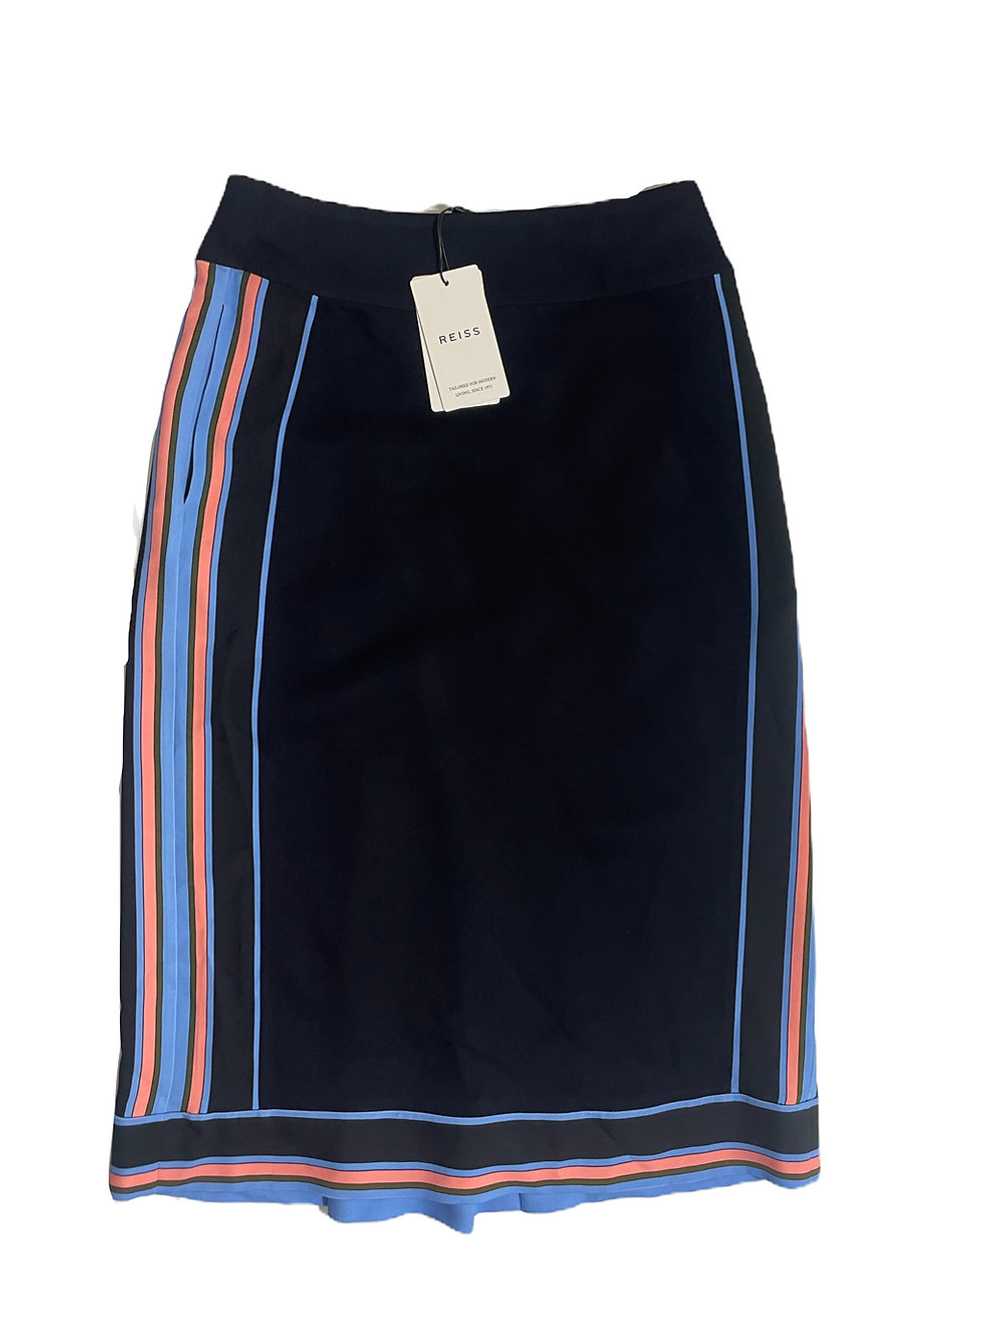 New With Tags Reiss Colour Block Skirt UK 6 - image 2